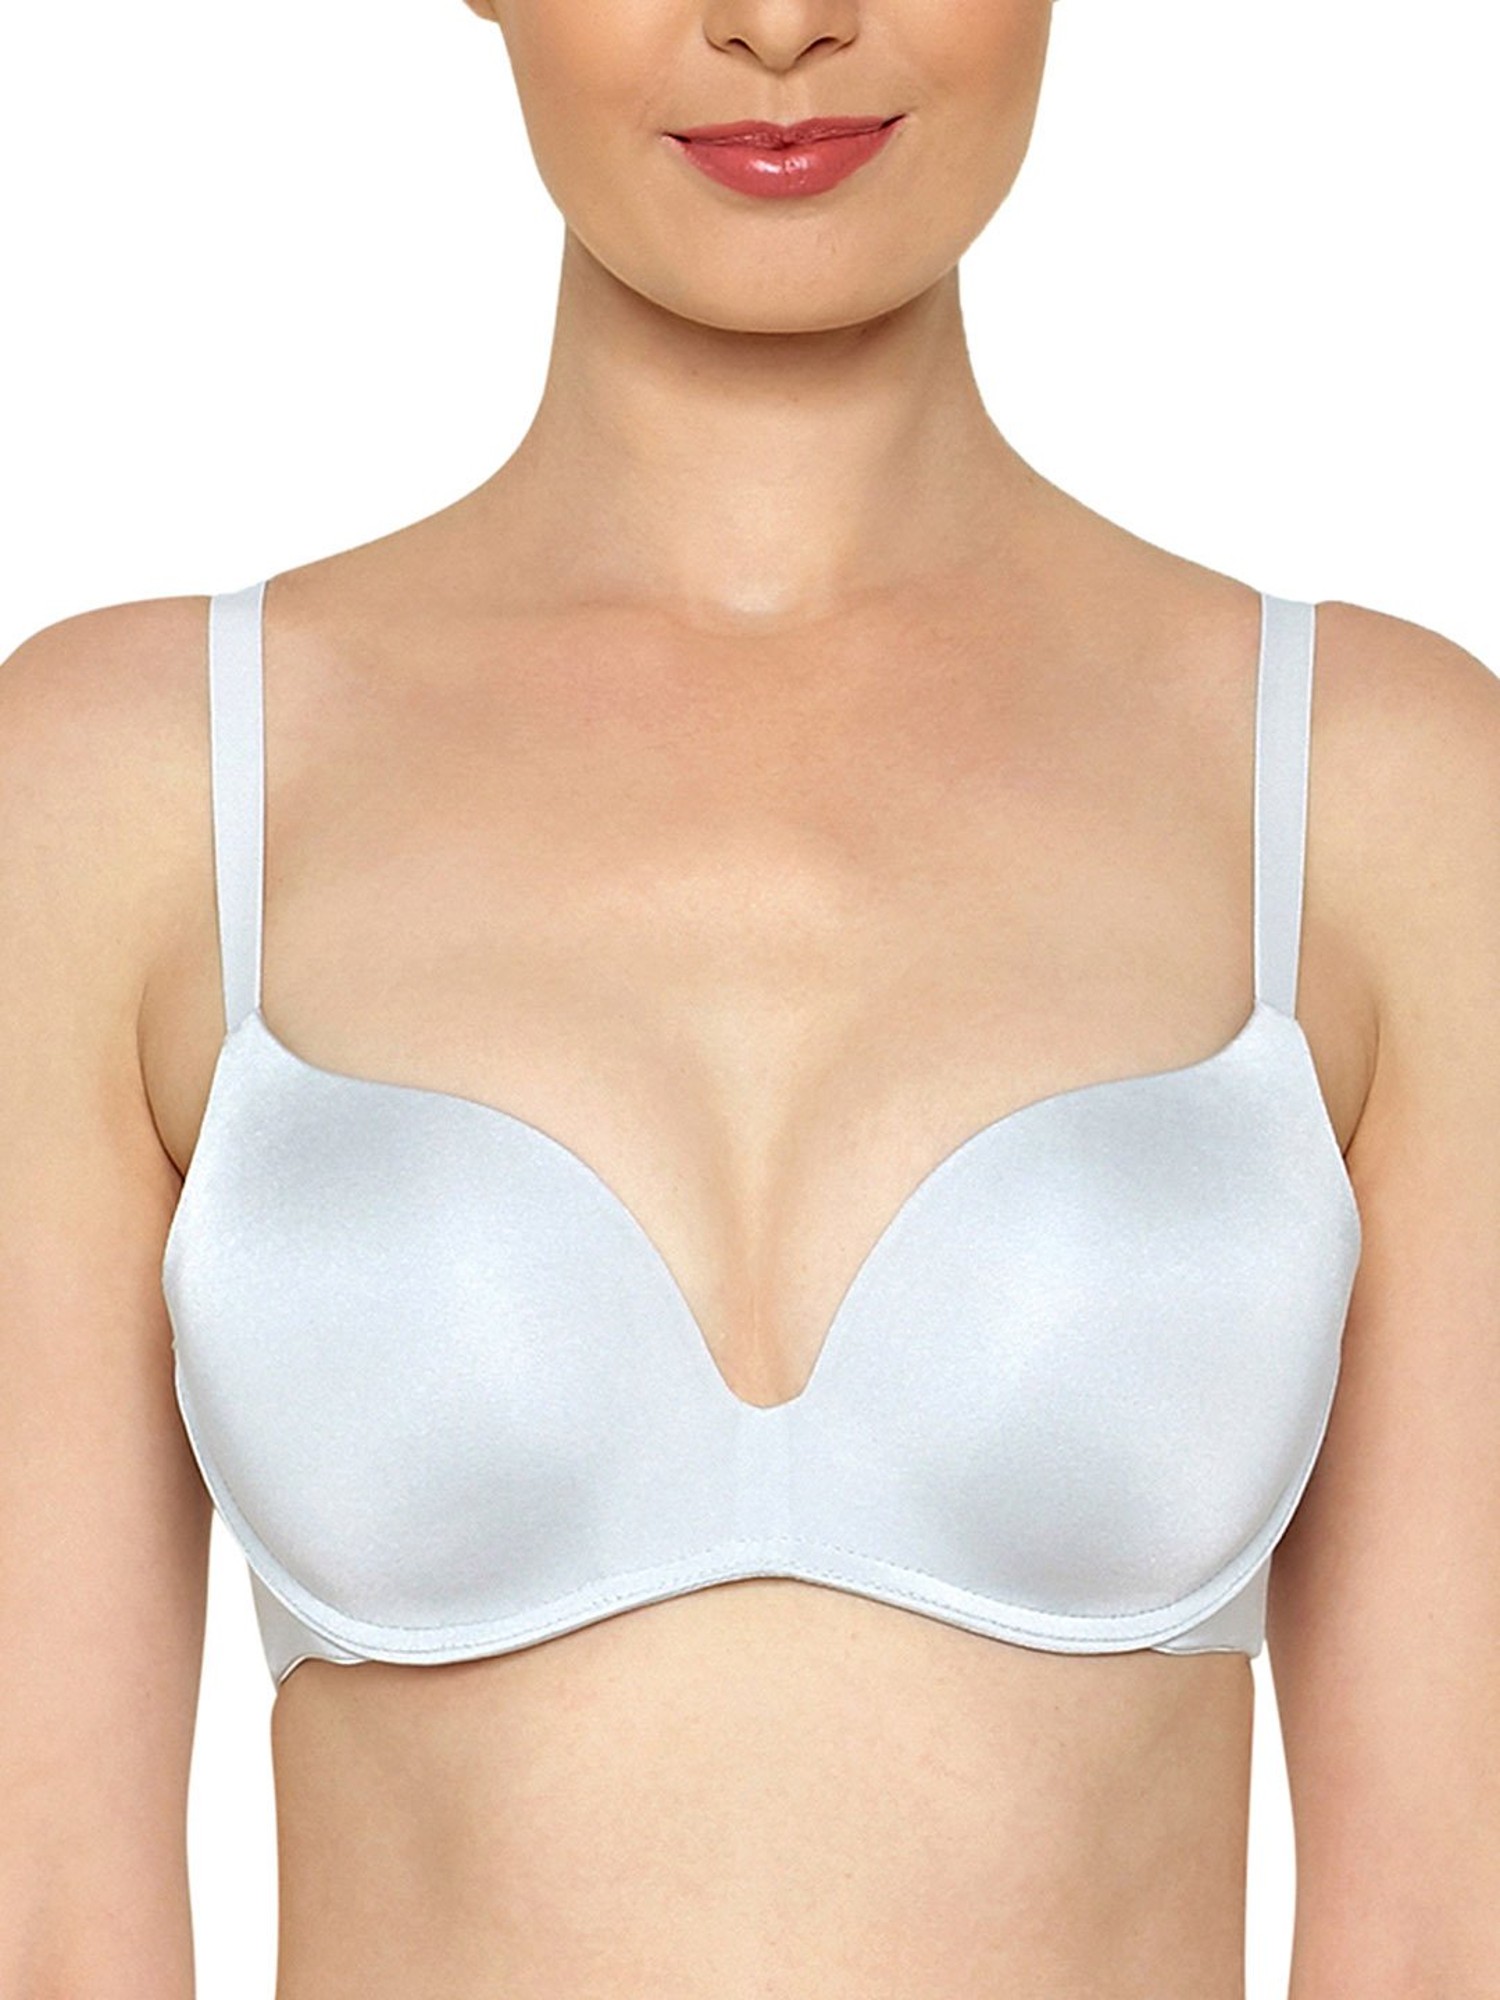 TRIUMPH Triumph Maximizer 118 Comfortable Padded Magic-Wire Push-Up Bra  Women Push-up Lightly Padded Bra - Buy TRIUMPH Triumph Maximizer 118  Comfortable Padded Magic-Wire Push-Up Bra Women Push-up Lightly Padded Bra  Online at